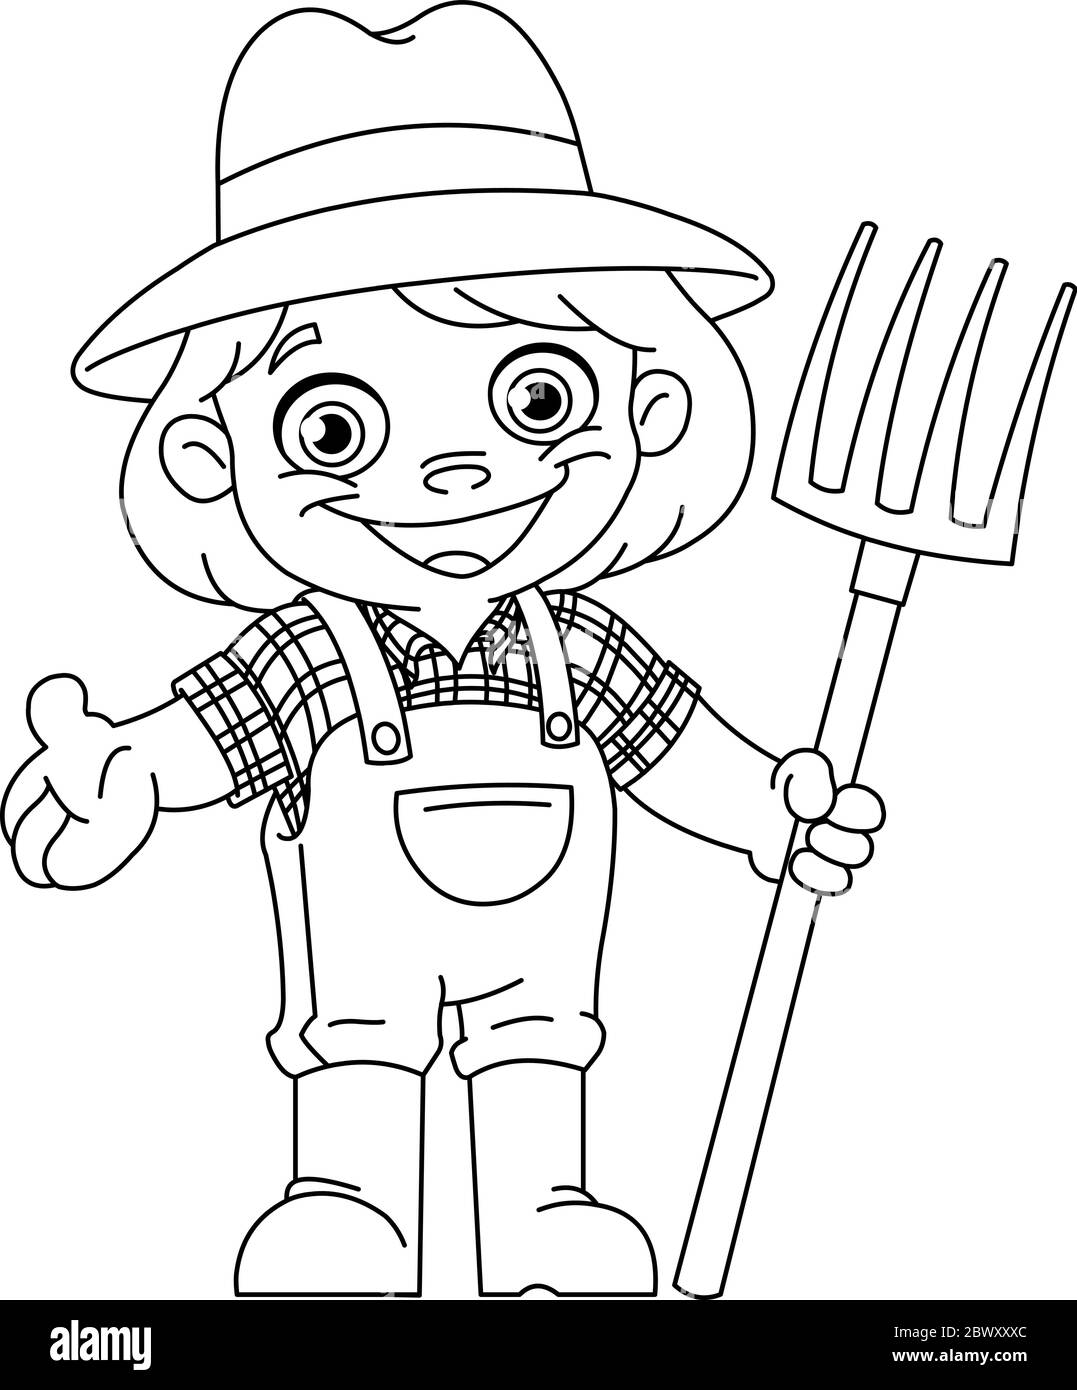 Outlined happy young girl farmer holding a pitchfork. Vector line art illustration coloring page. Stock Vector